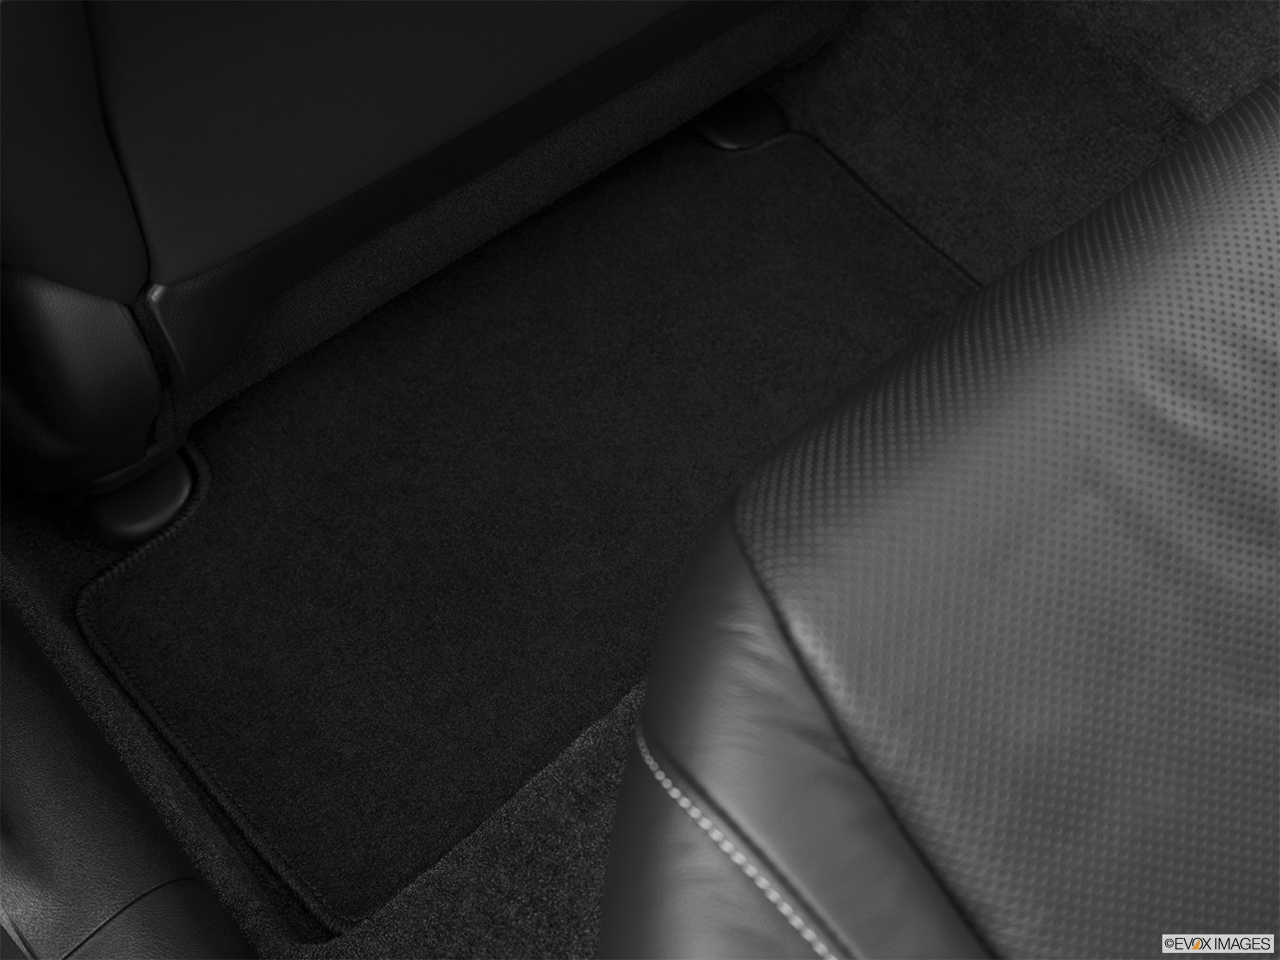 2013 Acura TSX 5-Speed Automatic Rear driver's side floor mat. Mid-seat level from outside looking in. 